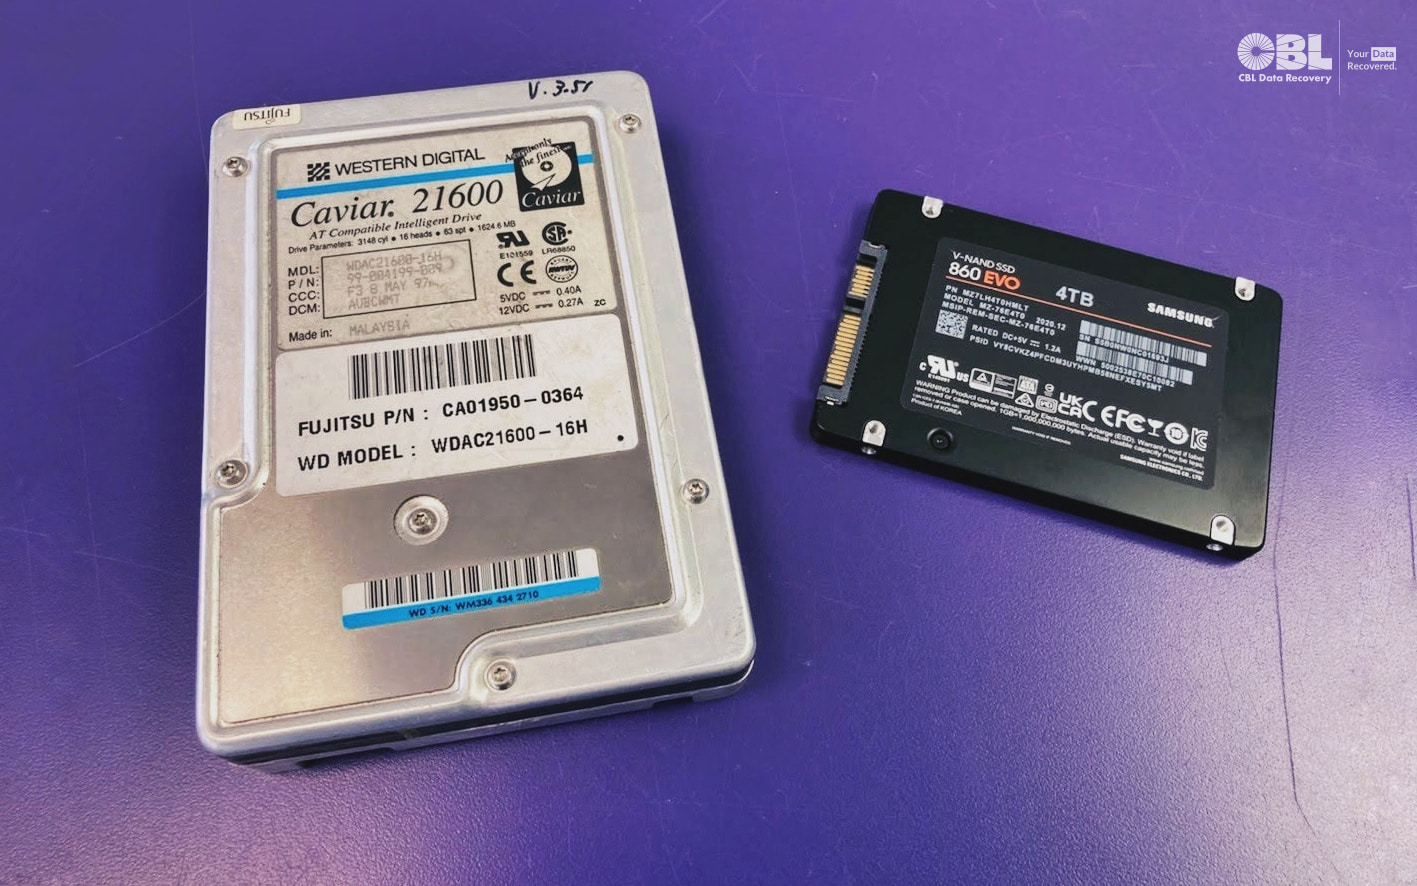 Two drives on a purple counter at CBL Data Recovery: a western digital caviar 21600 from 1997 and a Samsung EVO 4TB SSD from 2020.